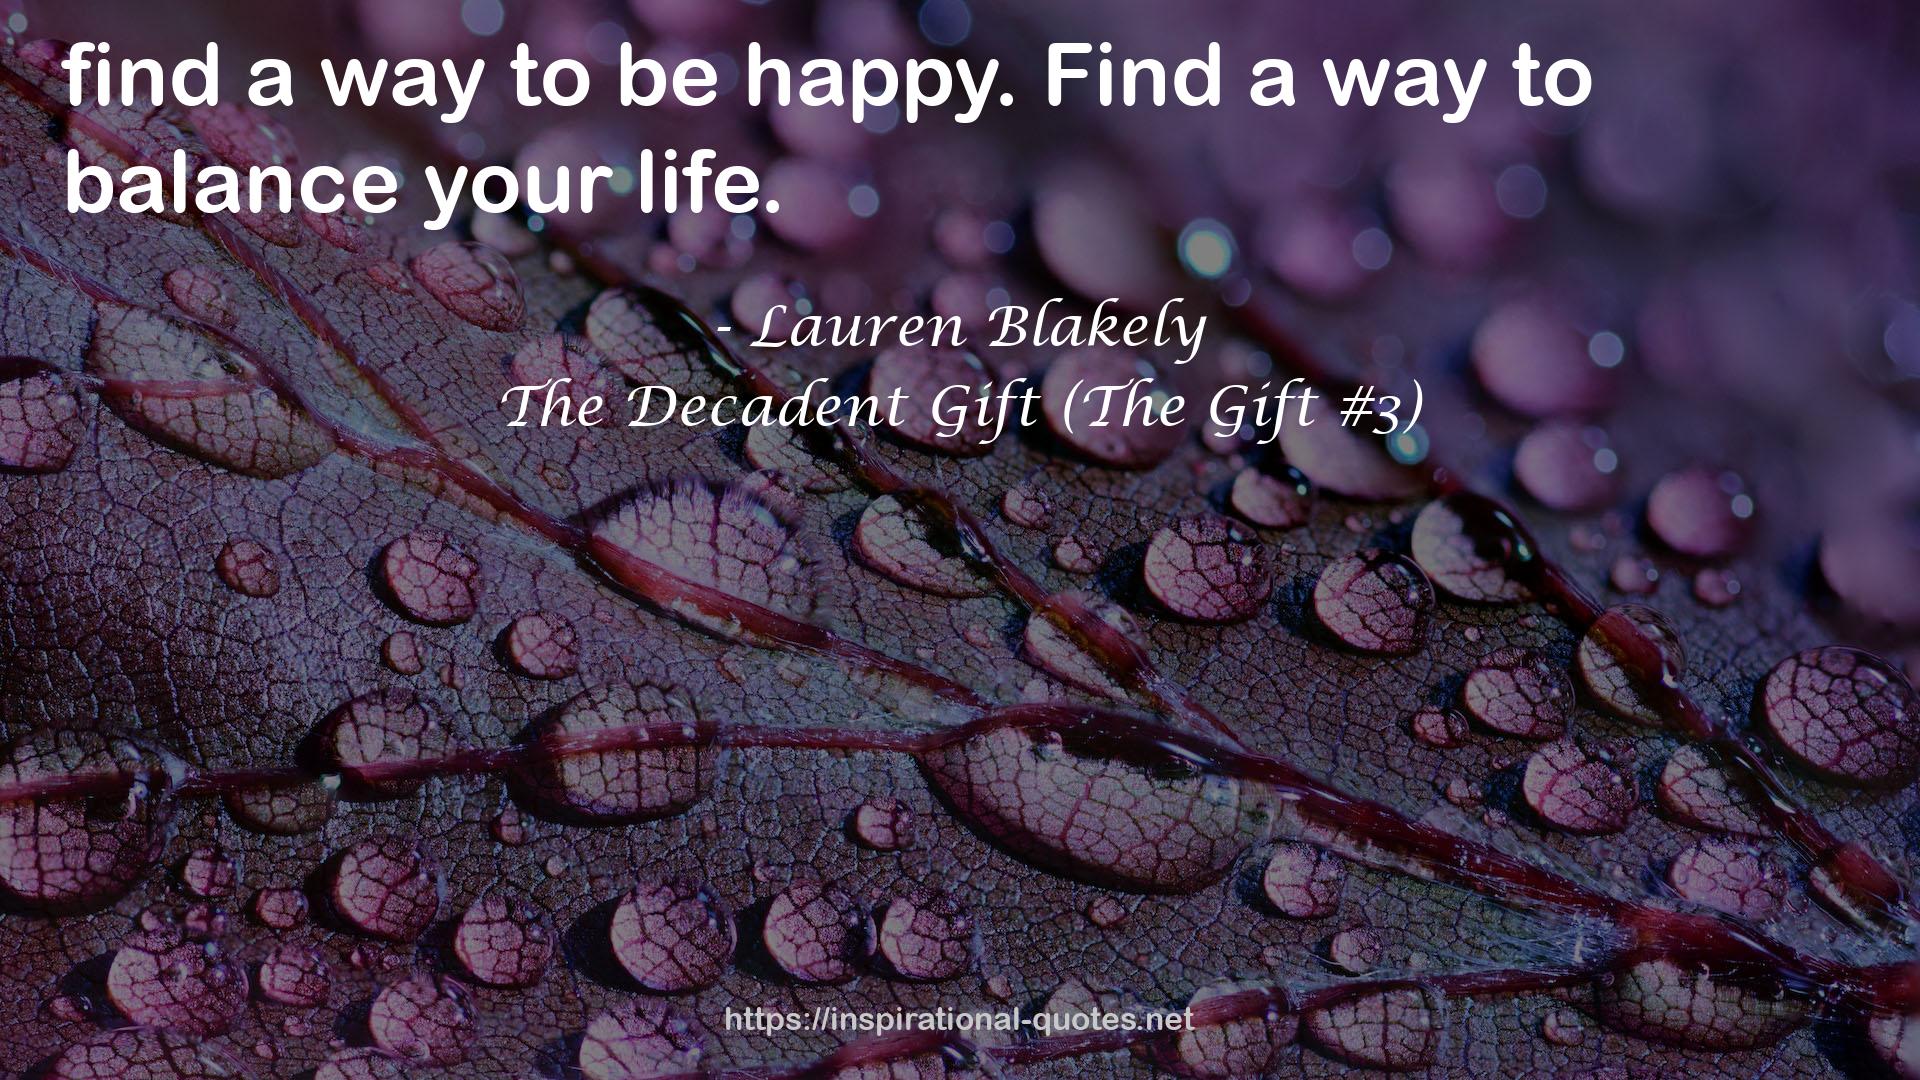 The Decadent Gift (The Gift #3) QUOTES